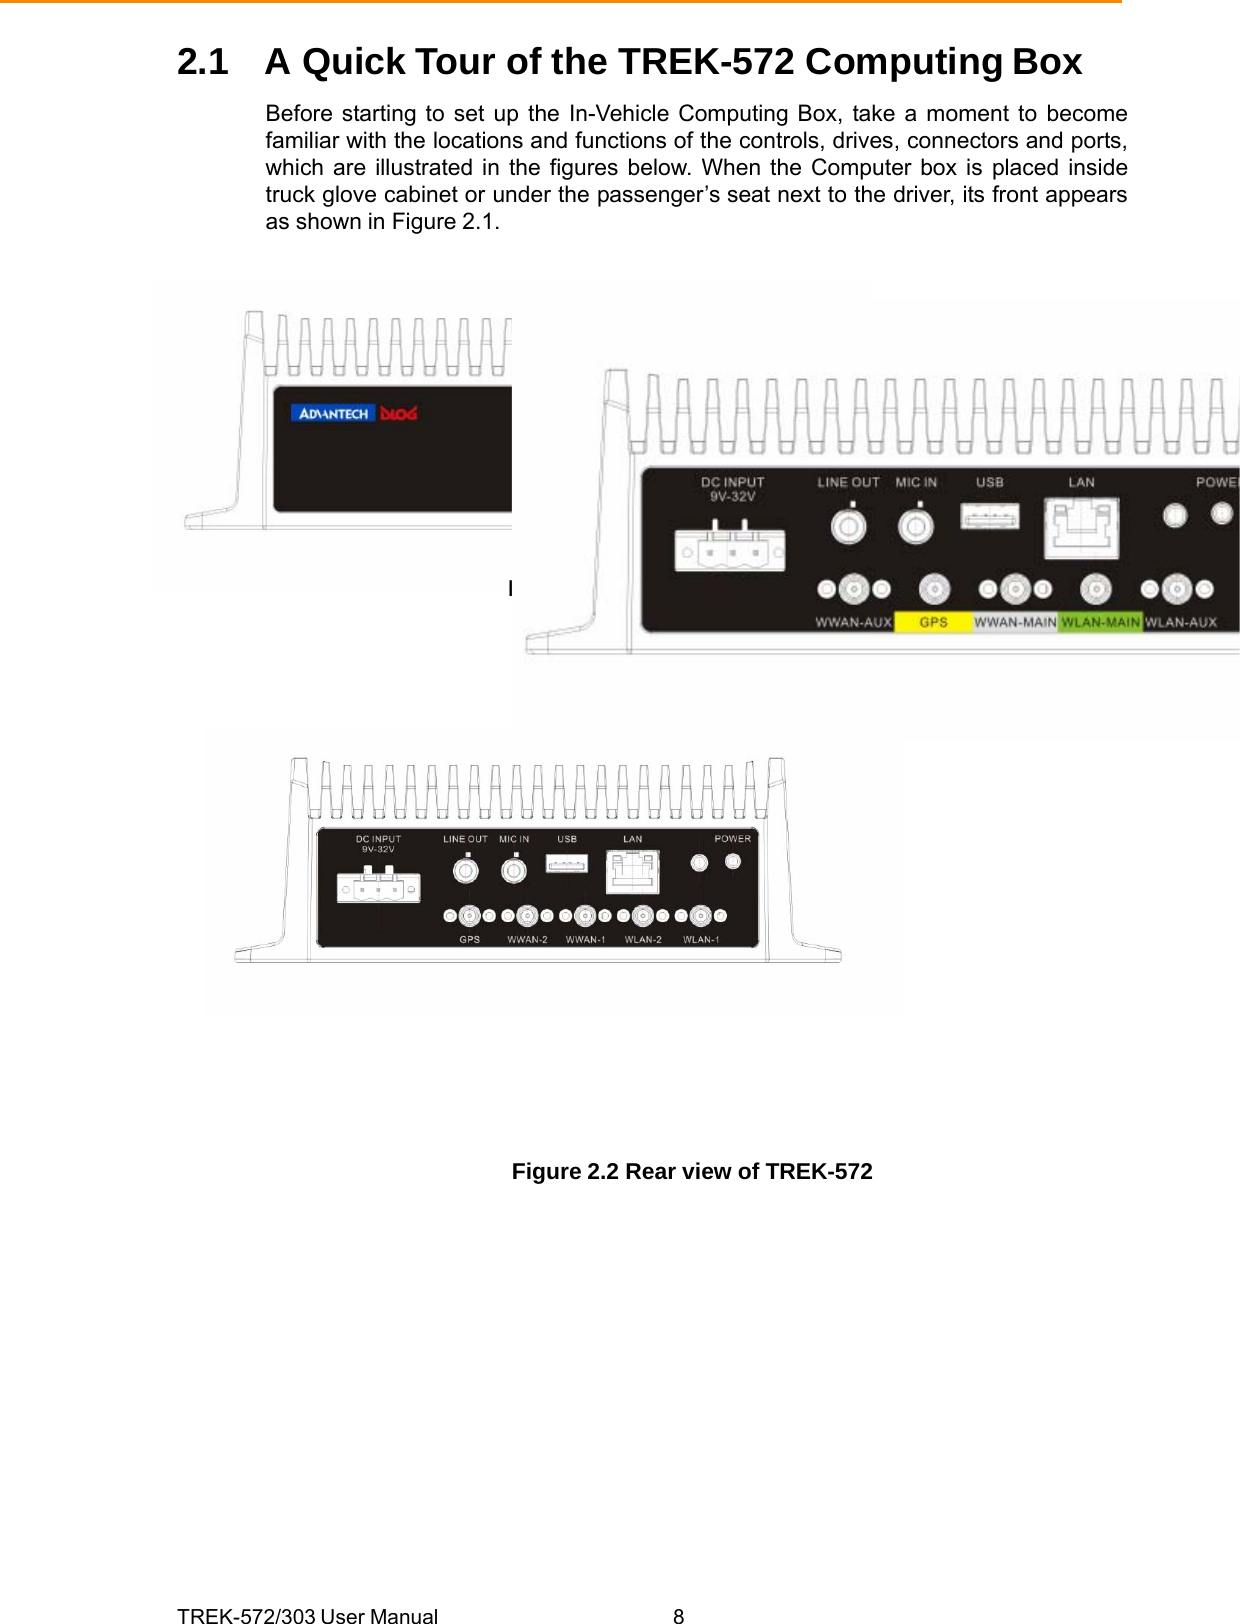 TREK-572/303 User Manual  82.1  A Quick Tour of the TREK-572 Computing Box Before starting to set up the In-Vehicle Computing Box, take a moment to become familiar with the locations and functions of the controls, drives, connectors and ports, which are illustrated in the figures below. When the Computer box is placed inside truck glove cabinet or under the passenger’s seat next to the driver, its front appears as shown in Figure 2.1.     Figure 2.1 Front view of TREK-572                 Figure 2.2 Rear view of TREK-572 